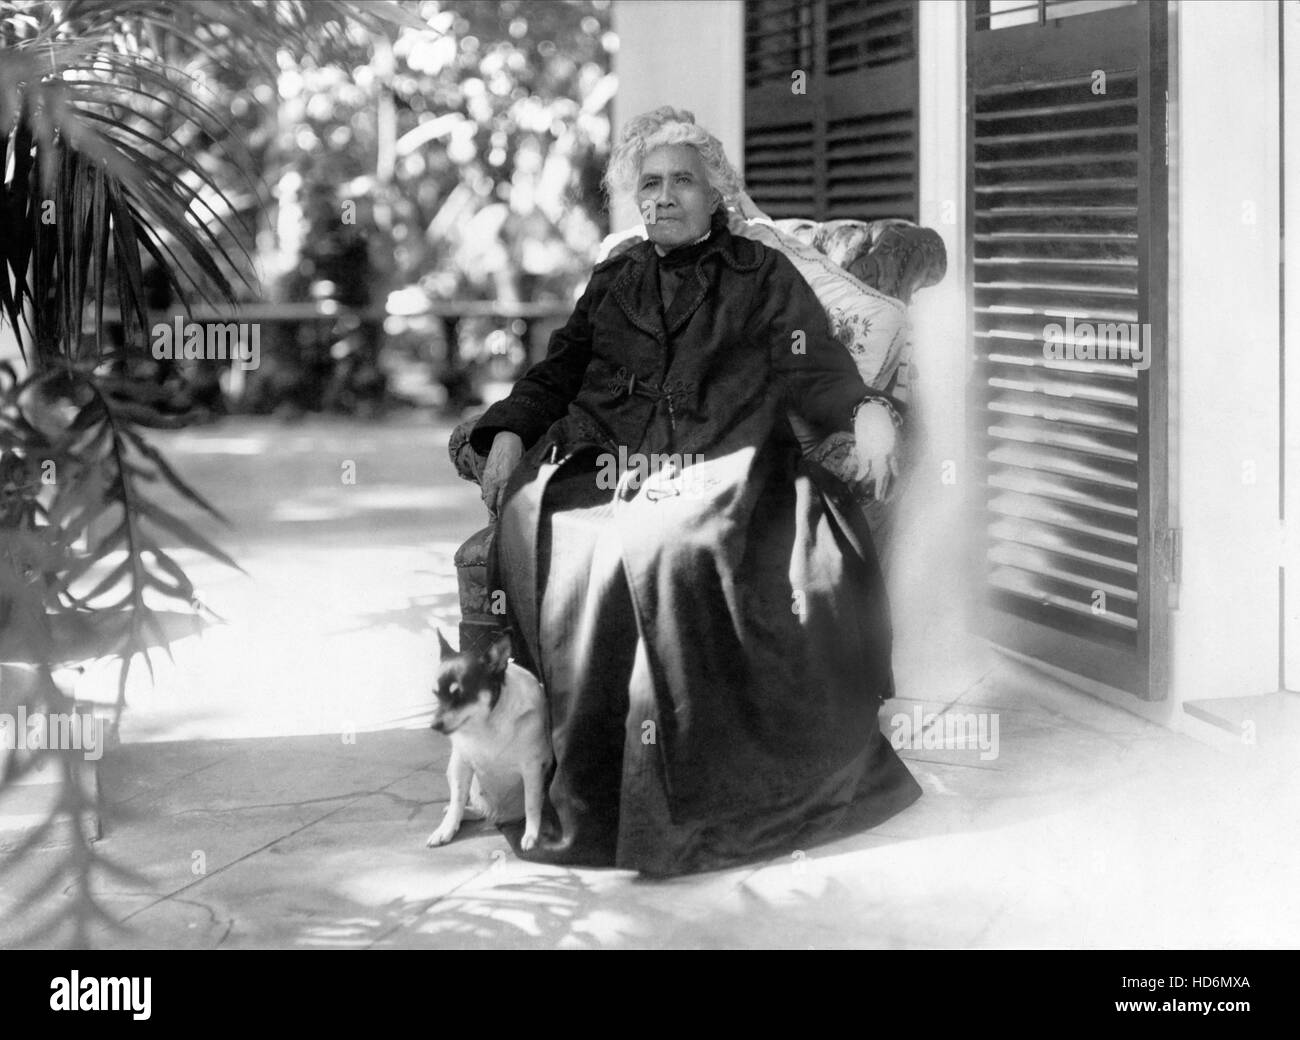 Queen Liliuokalani (1838-1917) was the Kingdom of Hawaii's first queen and final sovereign ruler.  She reigned from 1891 until 1893 when the monarchy was overthrown. (Photo c1917) Stock Photo